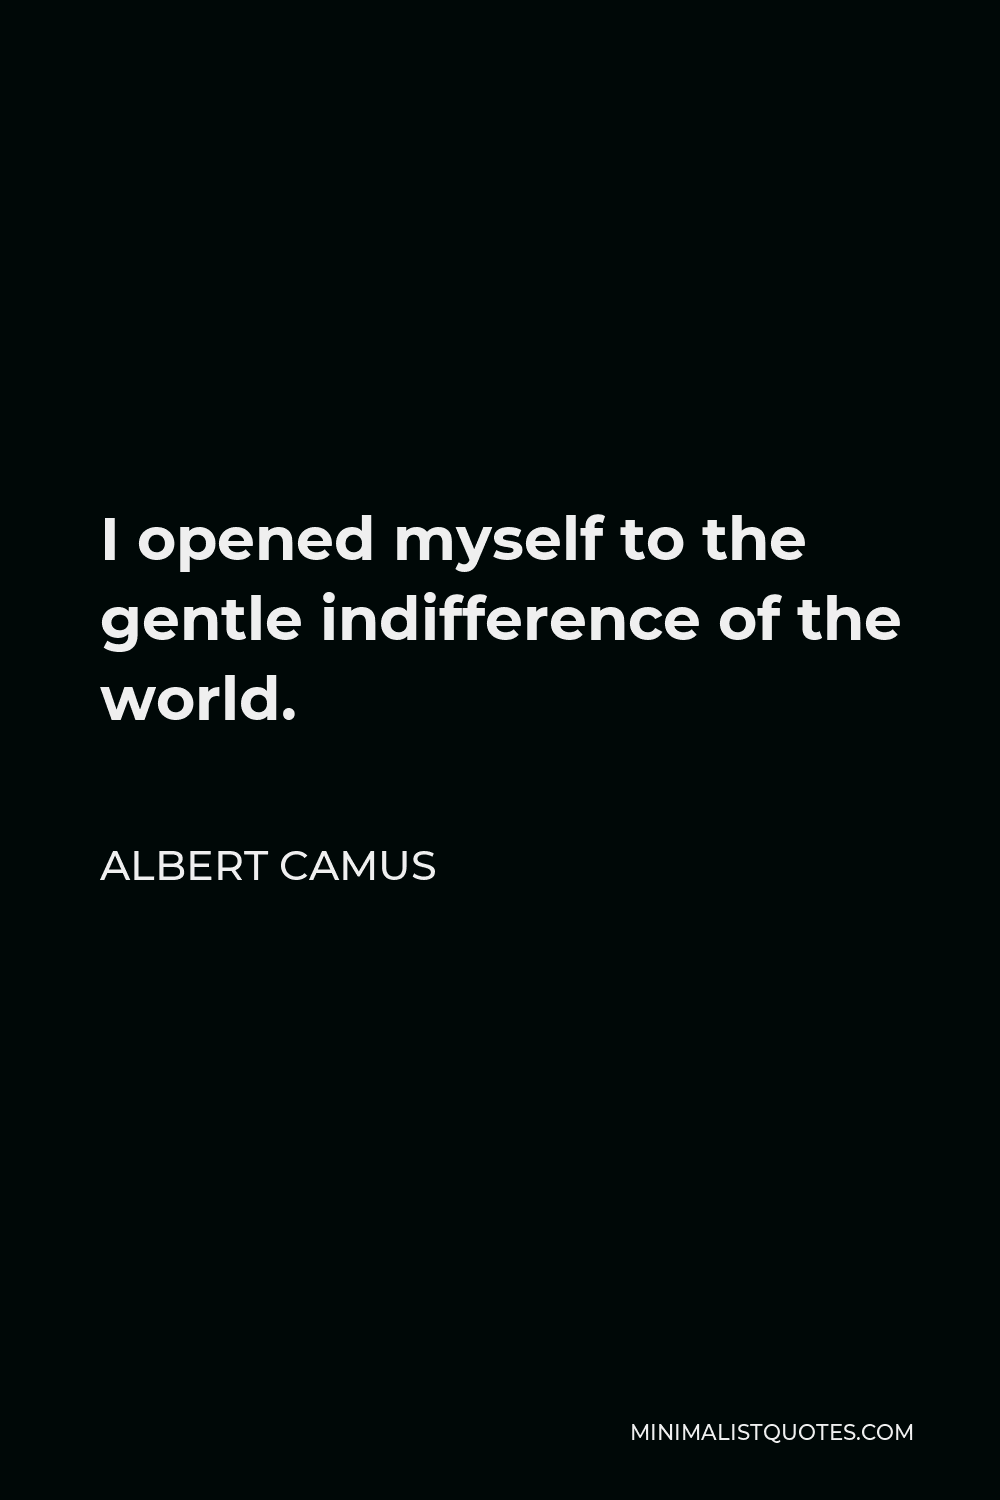 Albert Camus Quote - I opened myself to the gentle indifference of the world.